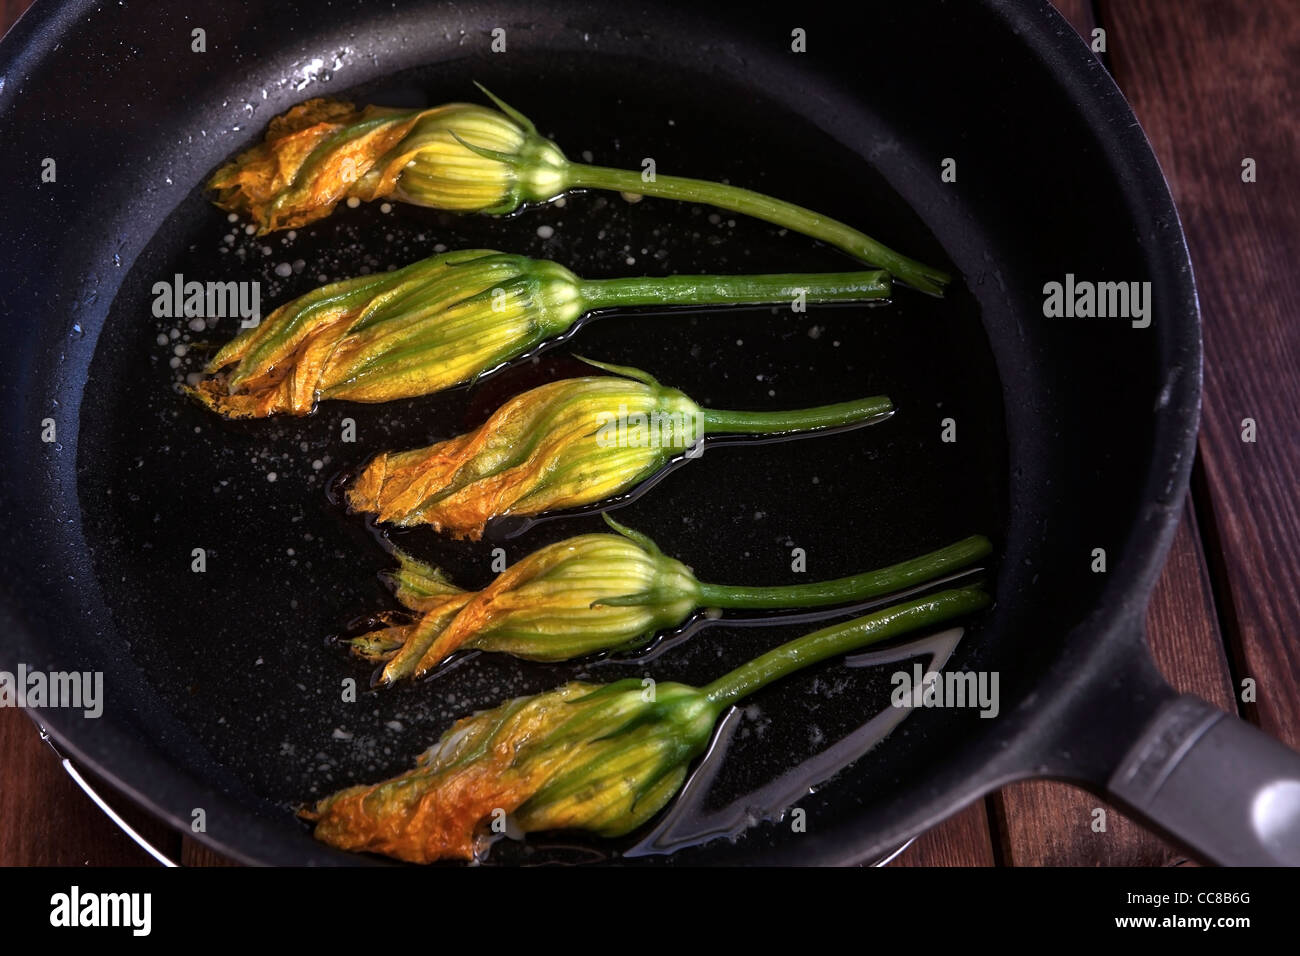 with cottage cheese, chives and tarragon stuffed squash blossoms in a pan with oil to fry Stock Photo